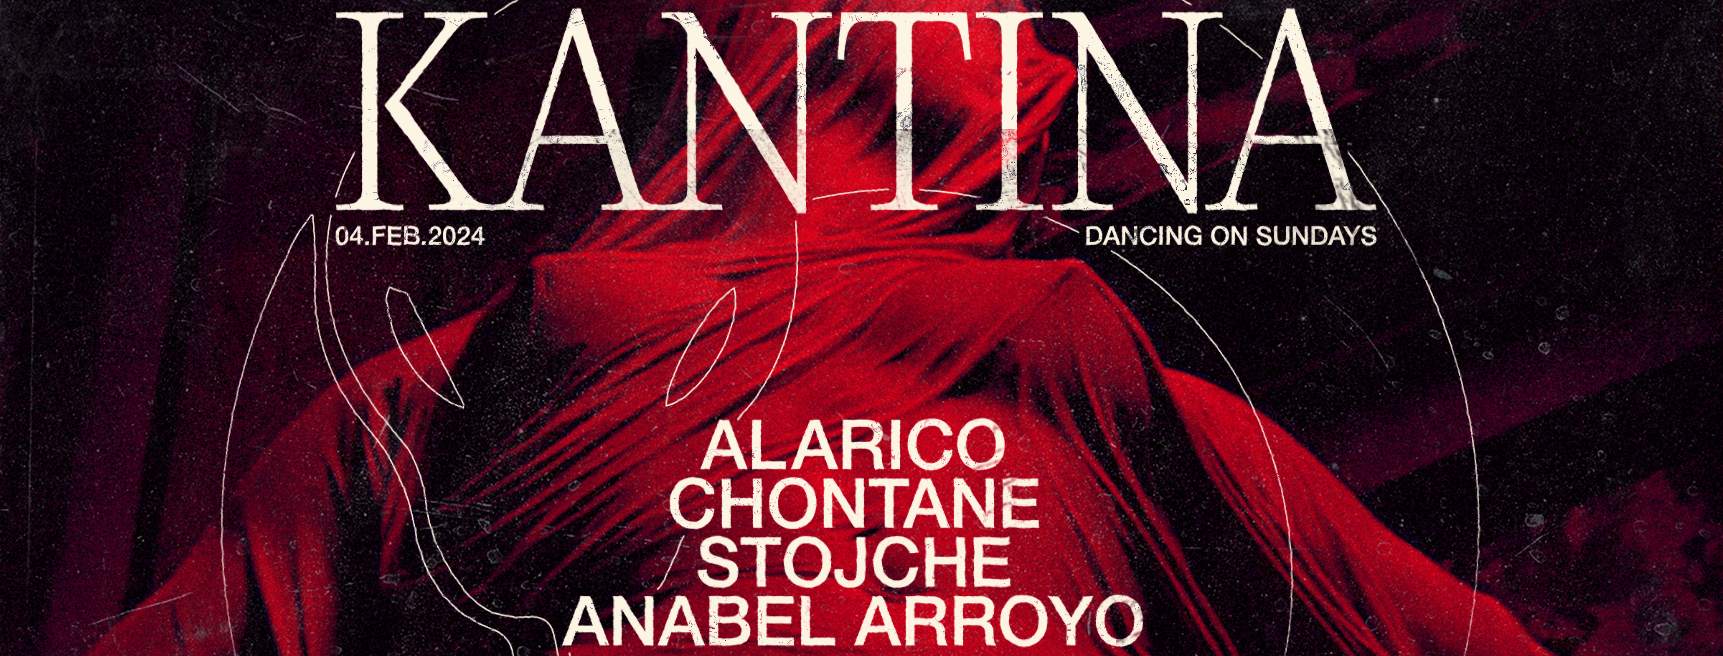 Laster presents KANTINA with Alarico, Chontane, Stojche & Anabel Arroyo - フライヤー表